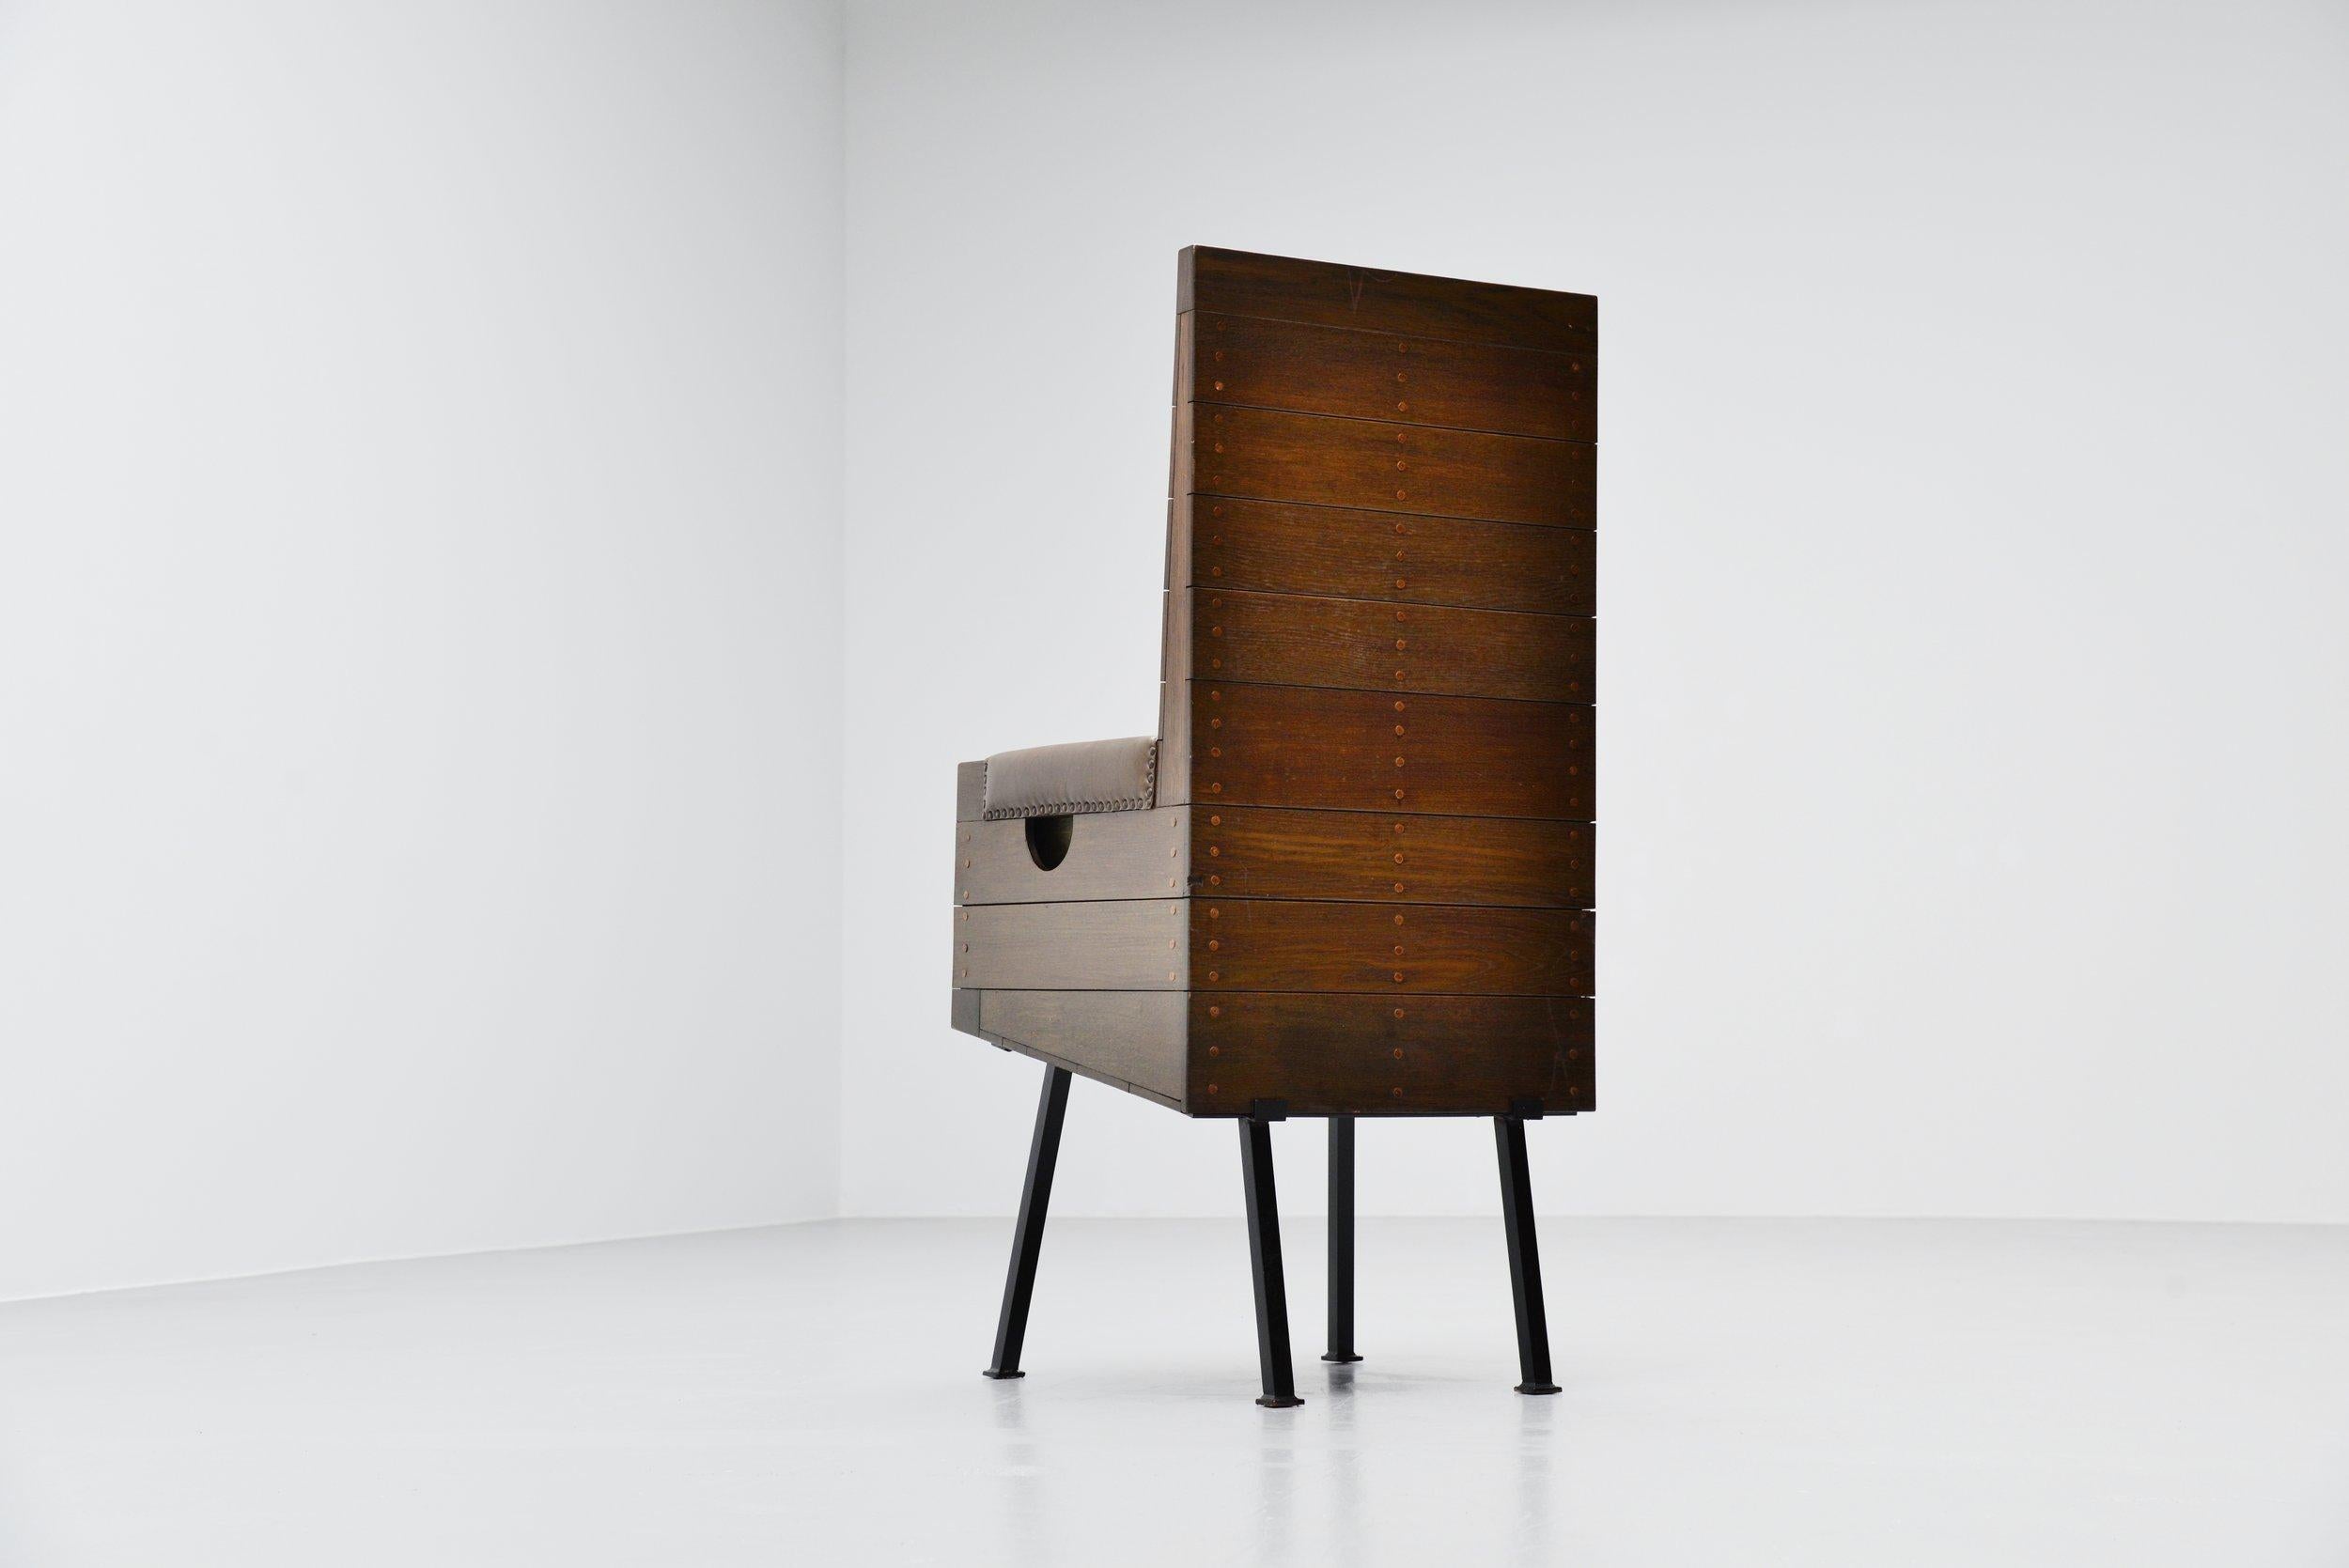 Cold-Painted Dom Hans van der Laan High Chair for Town Hall Budel, 1966